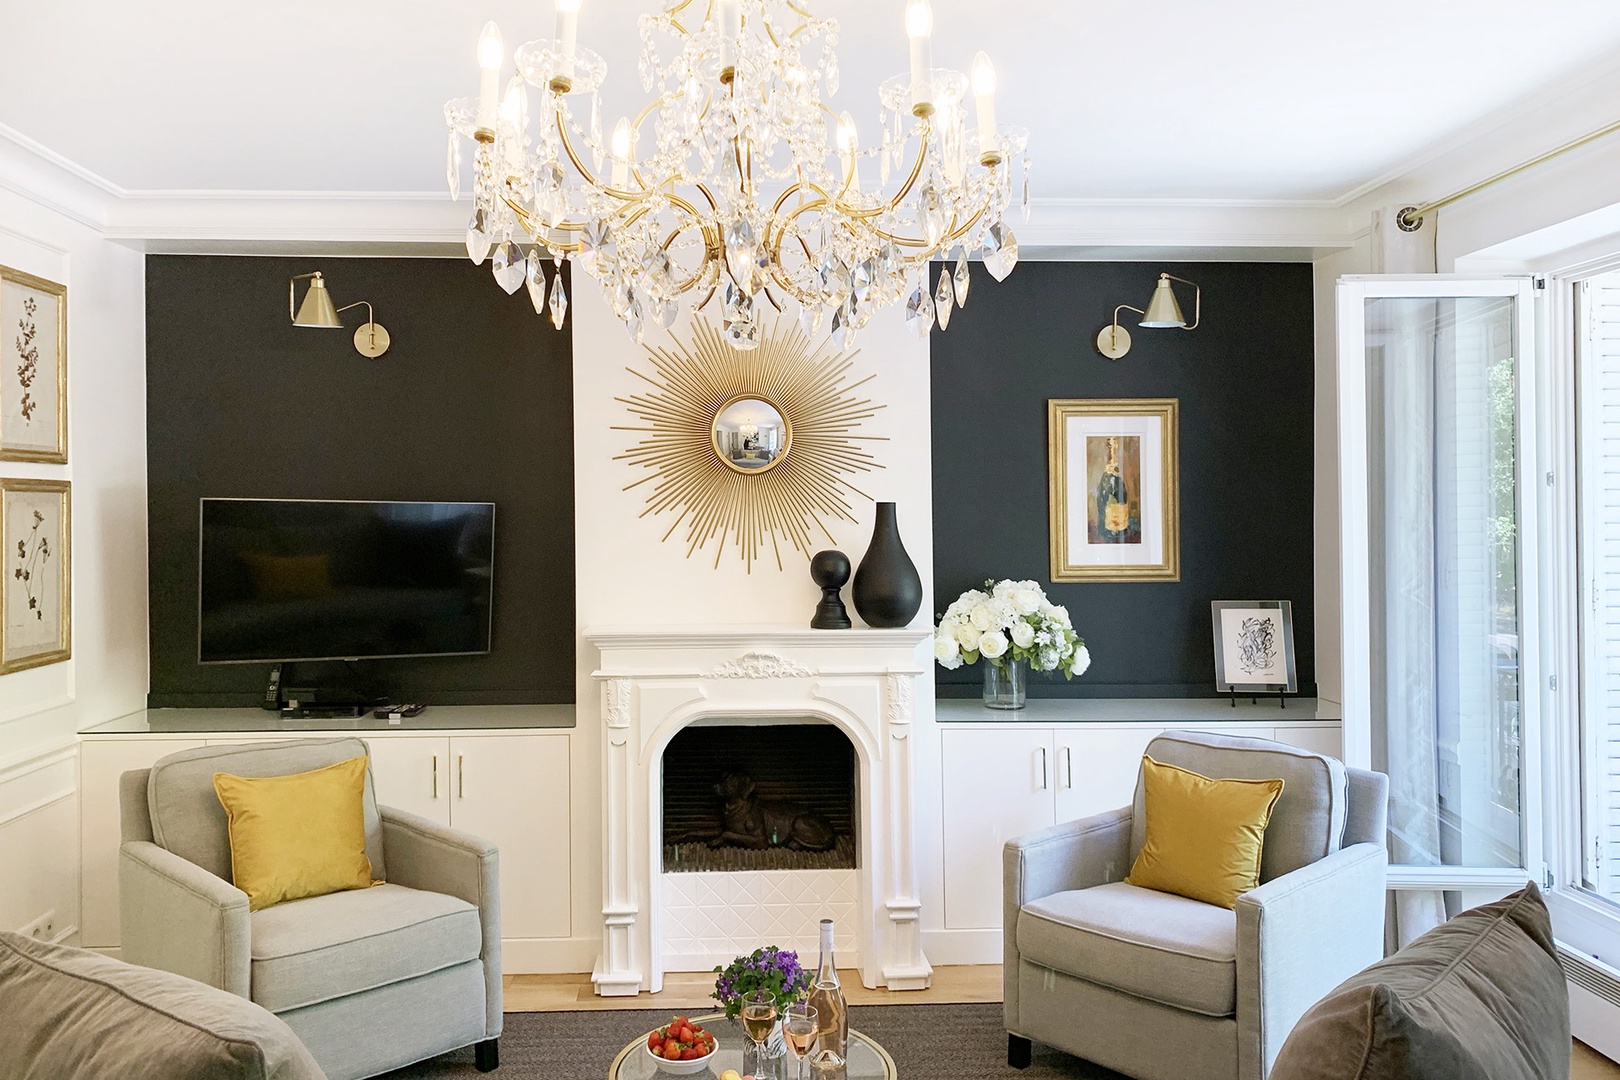 The decorative fireplace mantle and striking sunburst mirror give the room a chic Parisian feel.